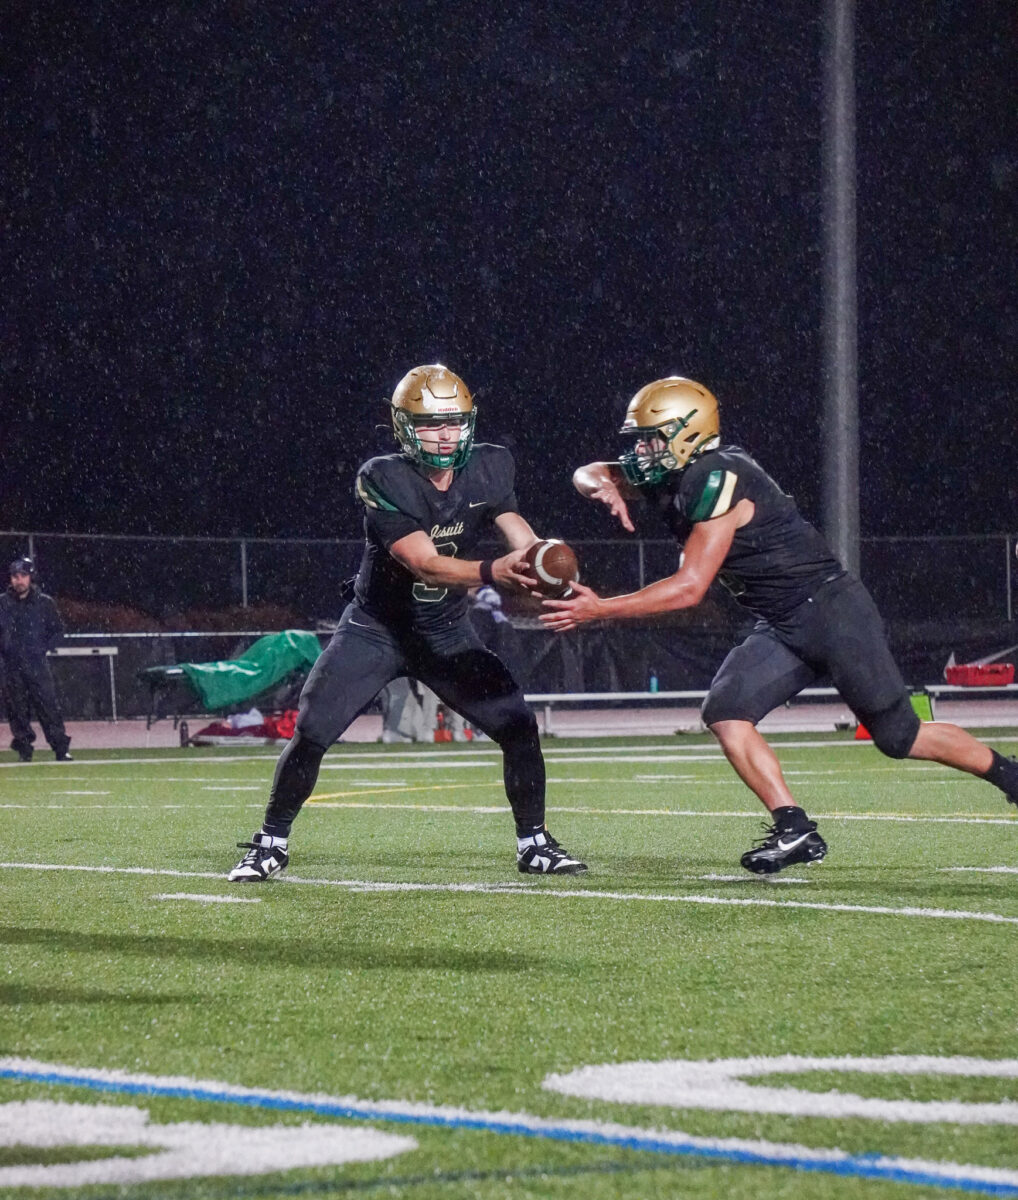 Lonnie Burt takes the handoff from Treynor Cleeland during Jesuits victory over Sunset at Cronin Field on October 13th.